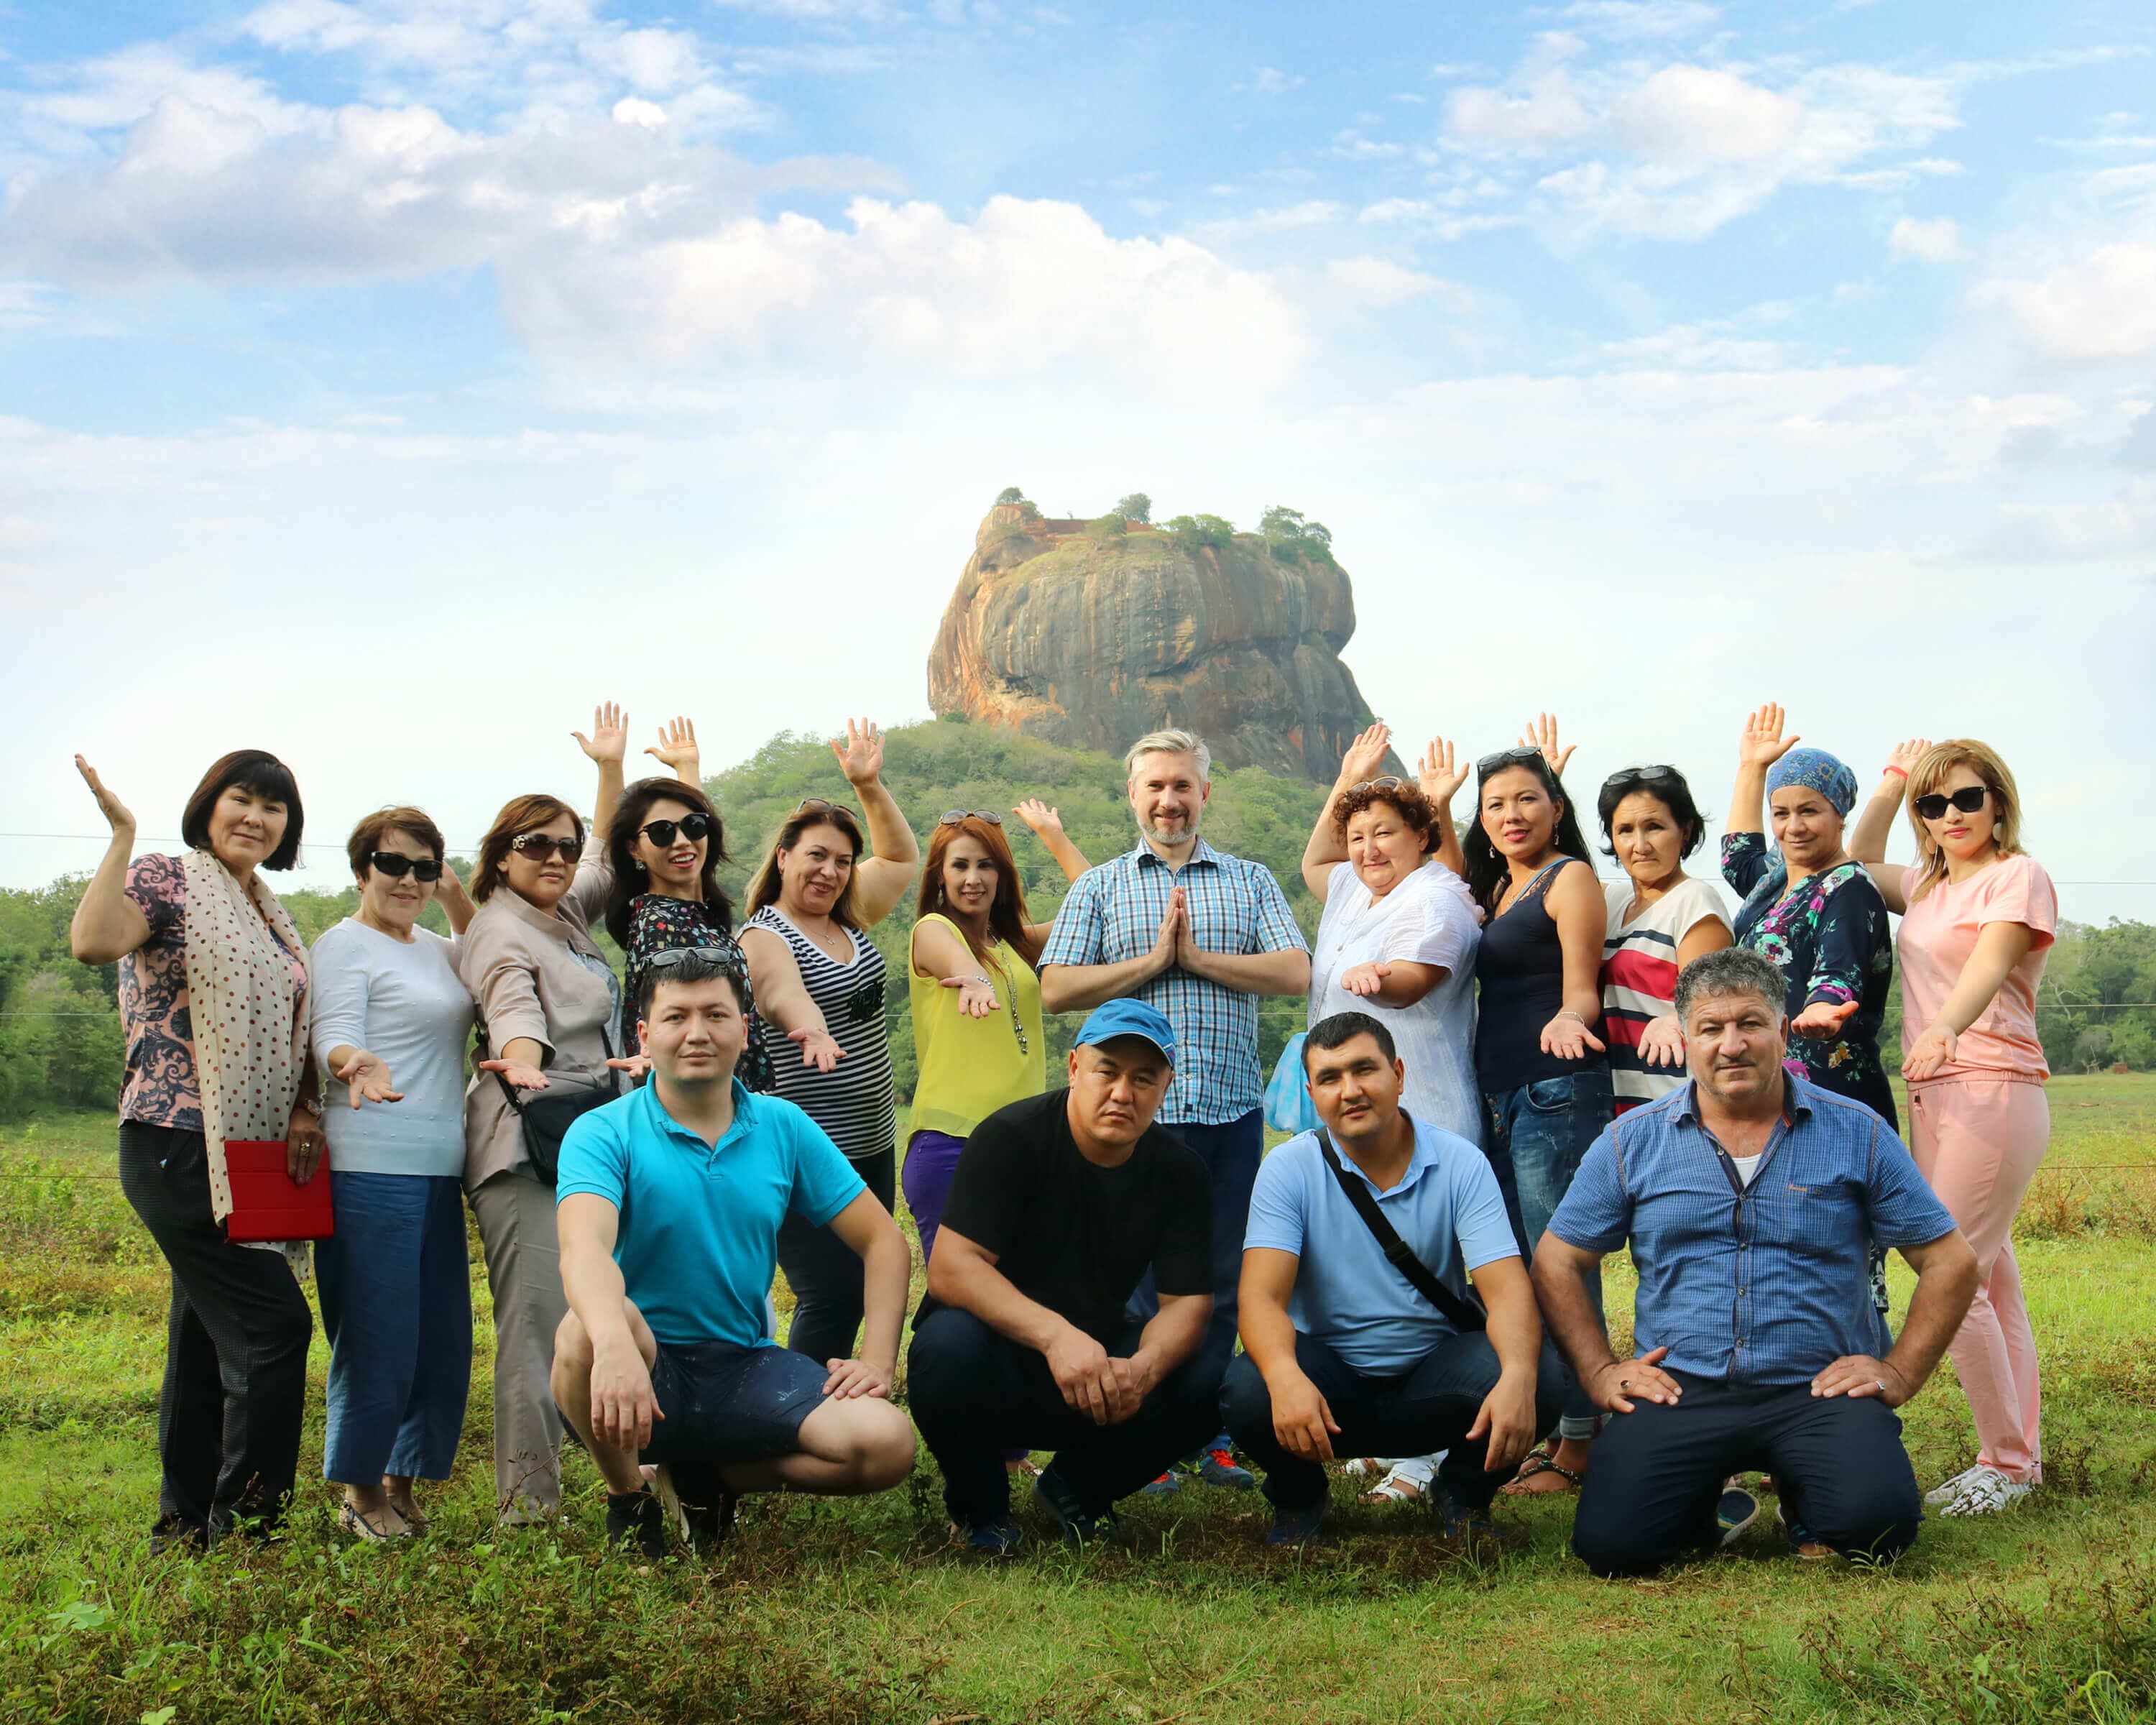 A trip to Sigiriya arranged as an incentive holiday for the team.